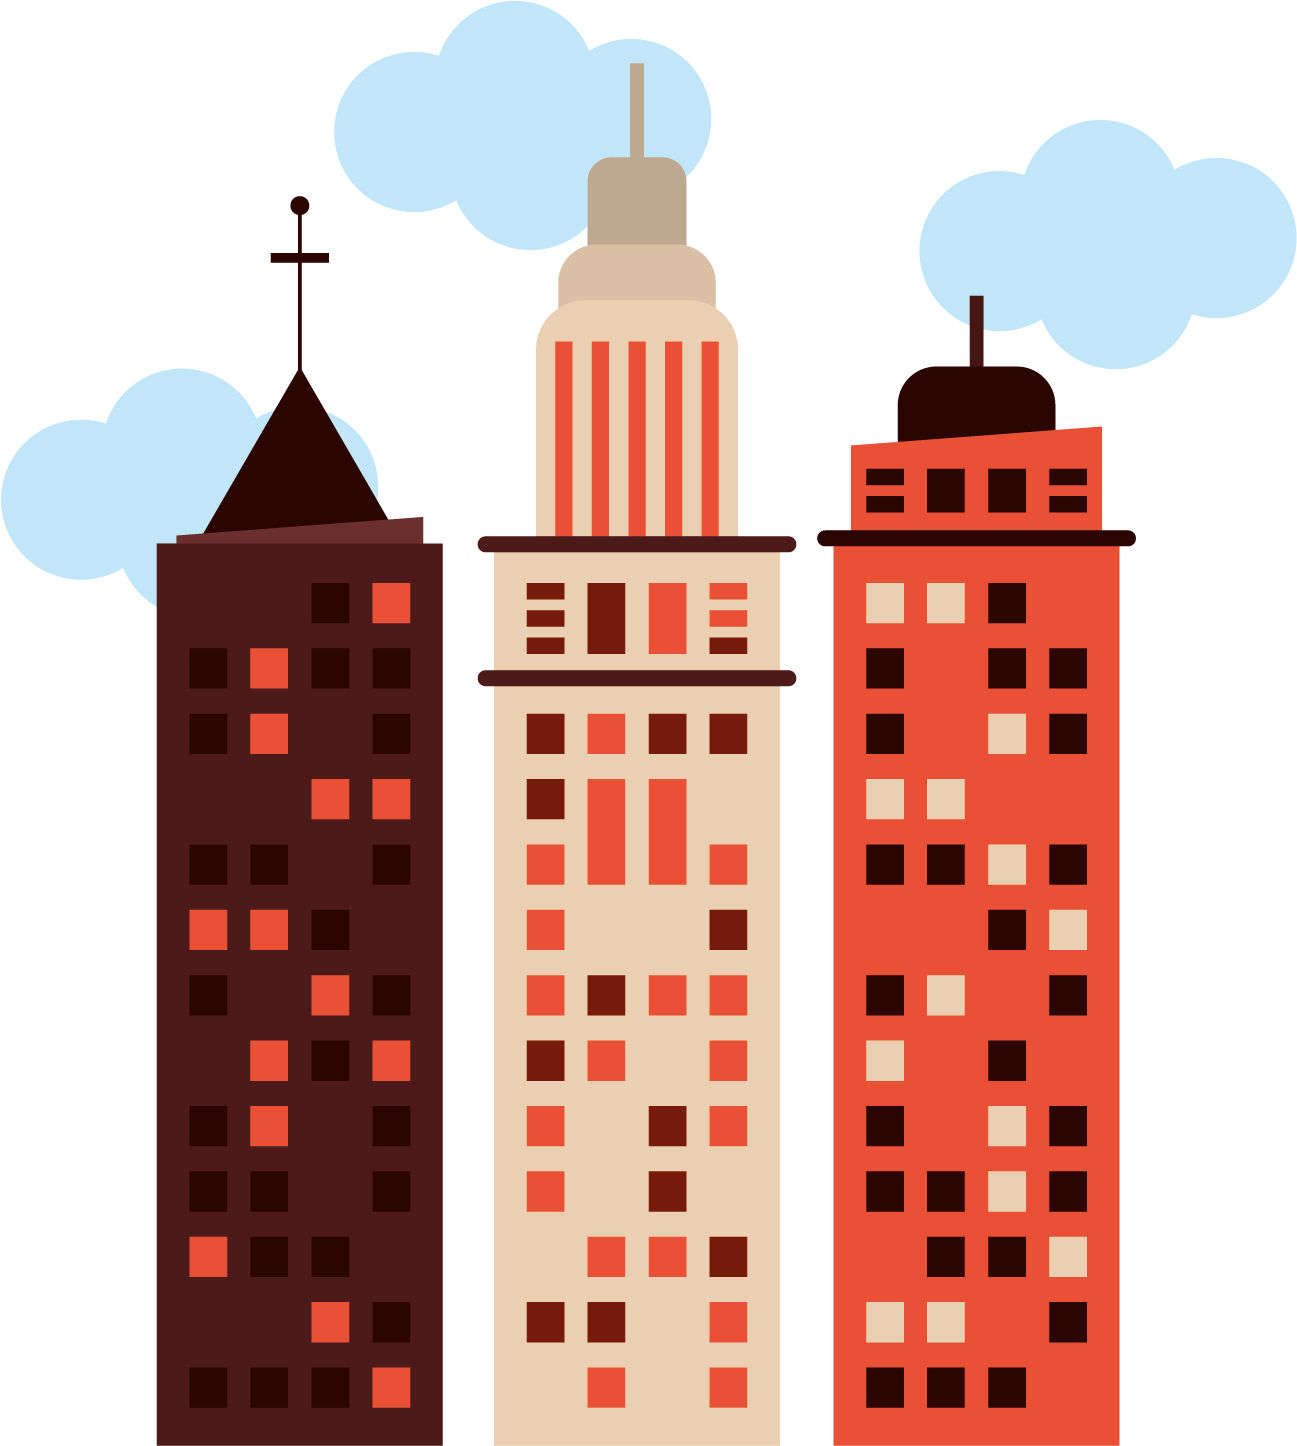 The Architecture Of The City Cartoon Illustration - Building Png Flat Design (1772x1772)